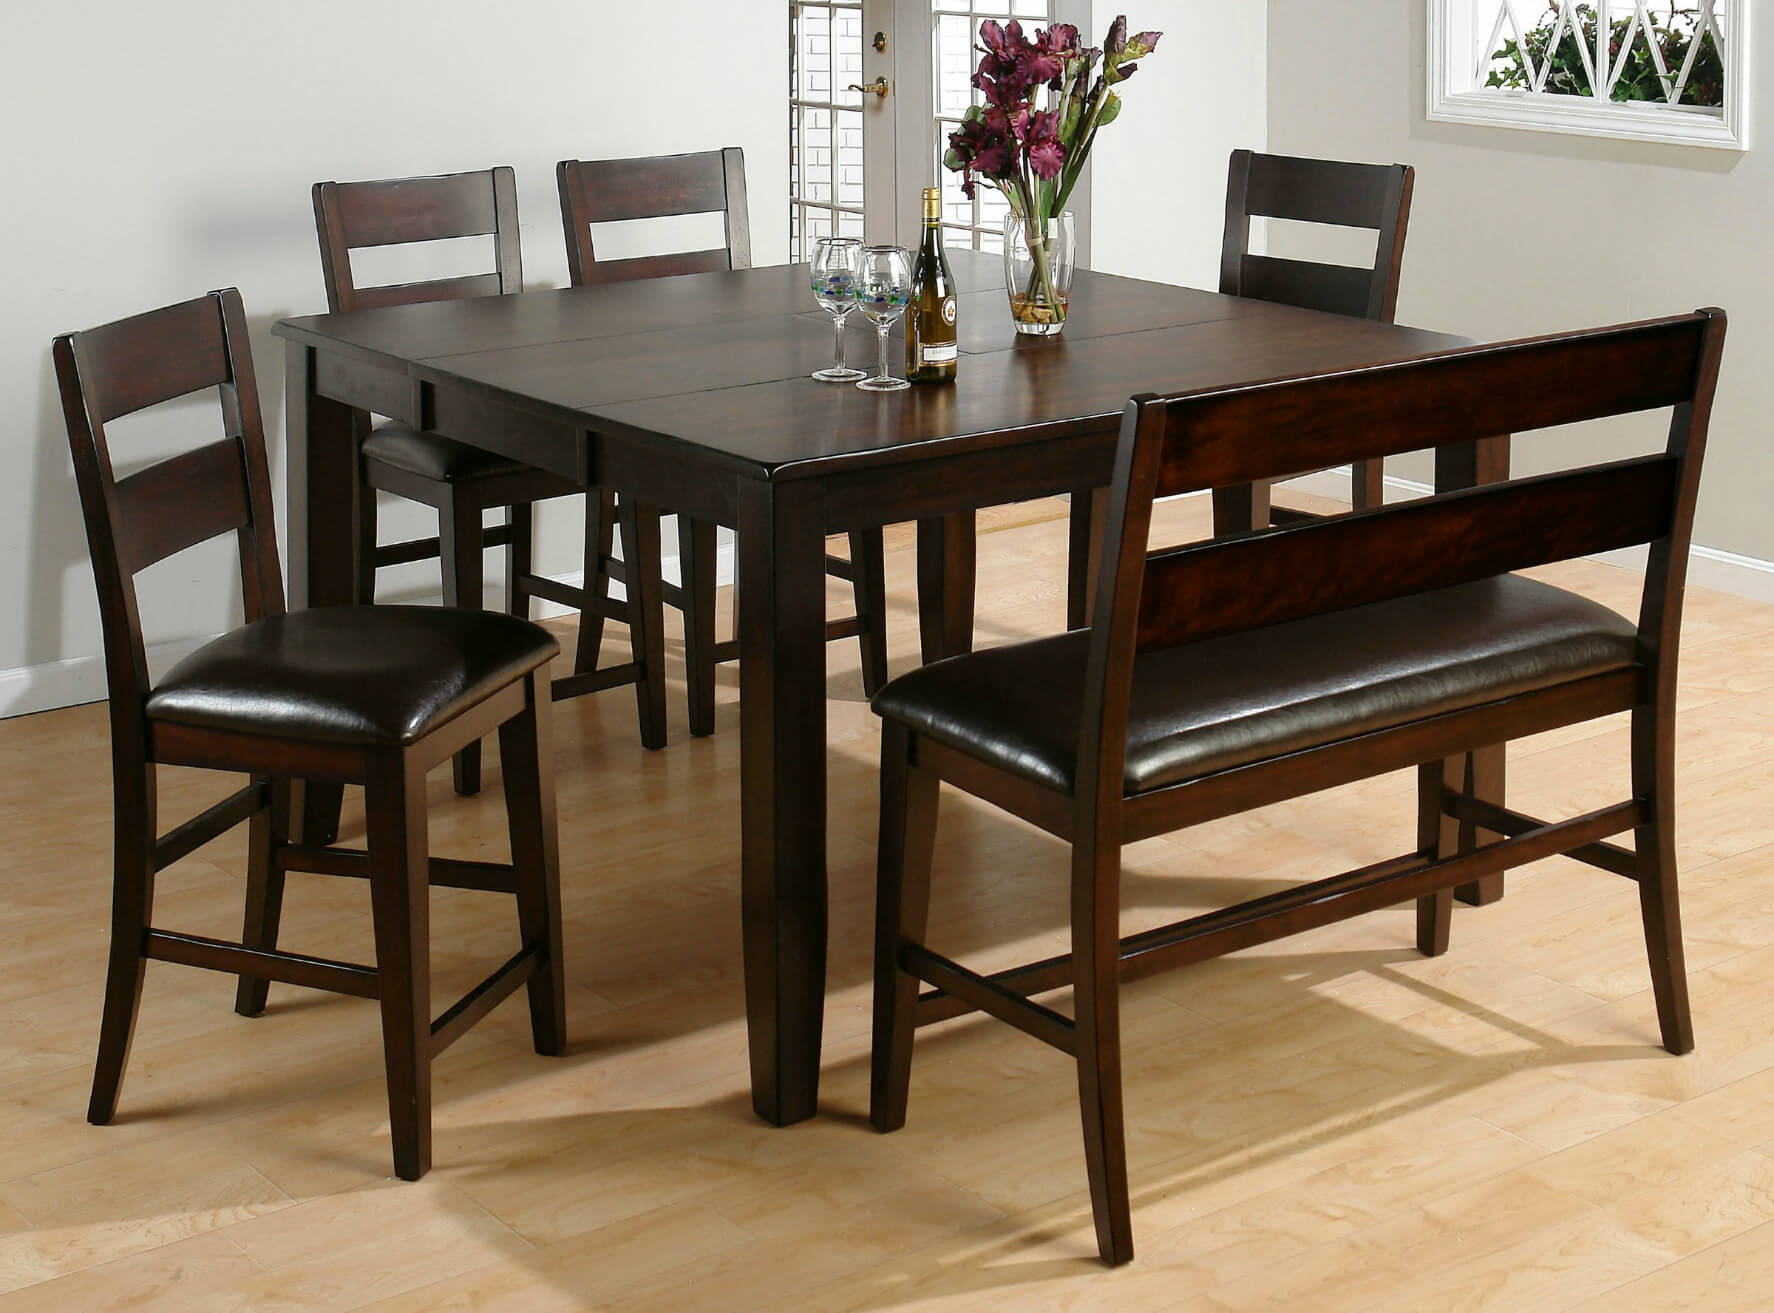 dining room table with bench and chairs 26 big small dining room sets with bench seating dining STQVJHW